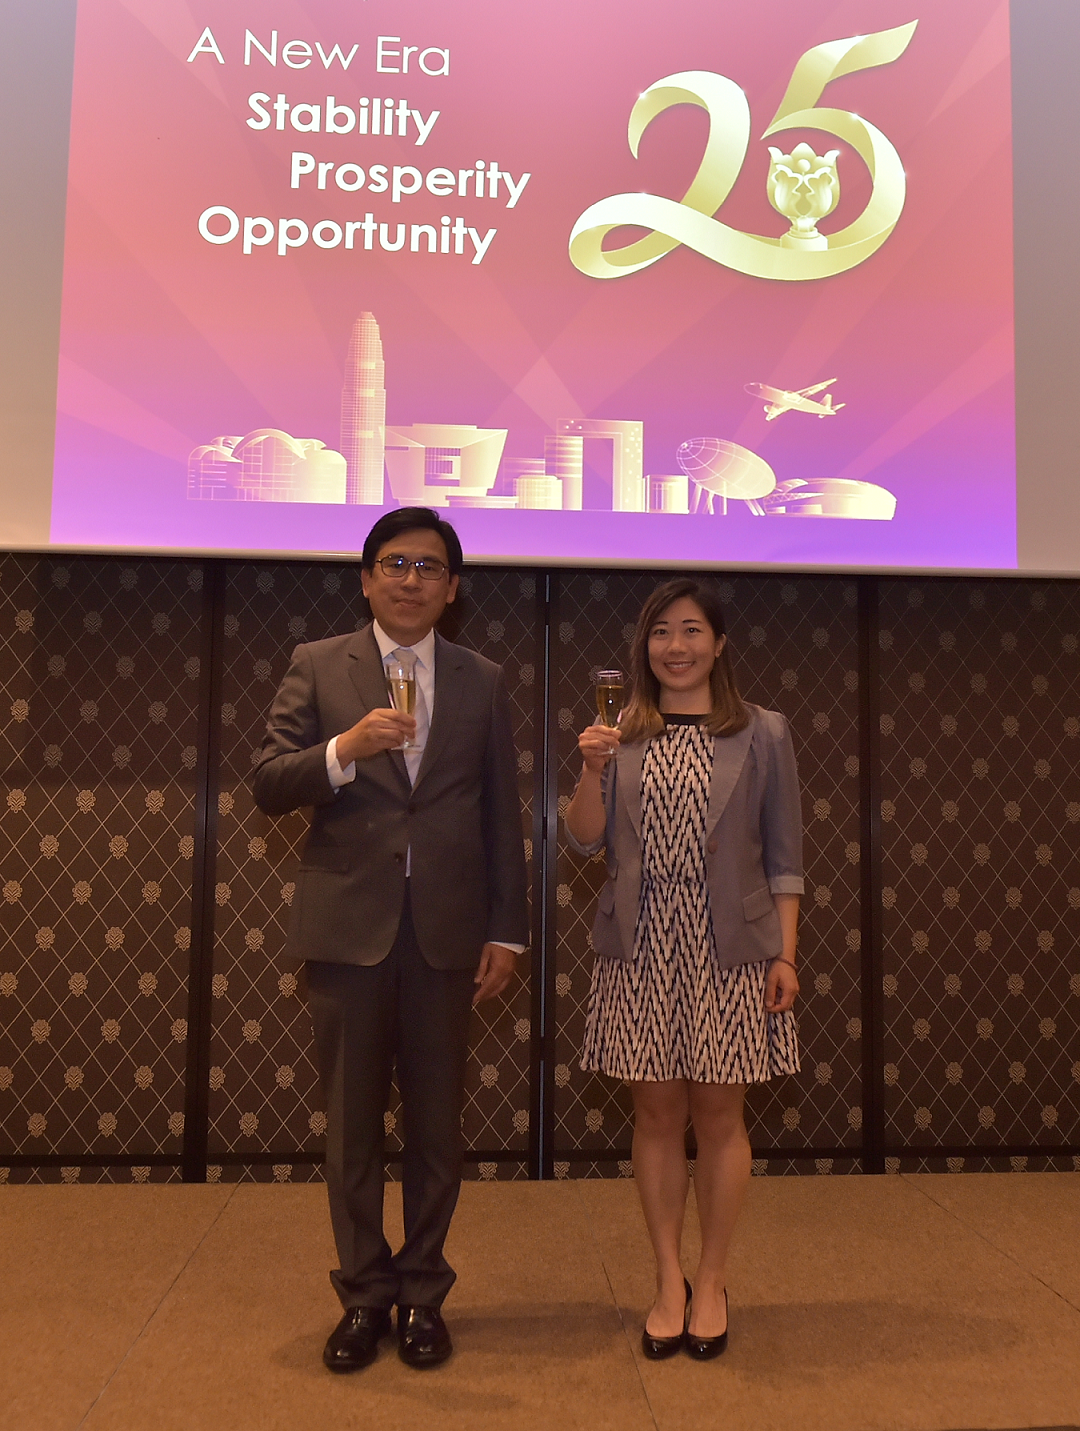 The Permanent Representative of the Hong Kong Special Administrative Region (HKSAR) of China to the WTO, Mr Laurie Lo (left), and the Director of the Hong Kong Economic and Trade Office, Berlin, Ms Jenny Szeto (right) toasted at the reception in Geneva celebrating the 25th anniversary of the establishment of the HKSAR on June 30 (Geneva time).